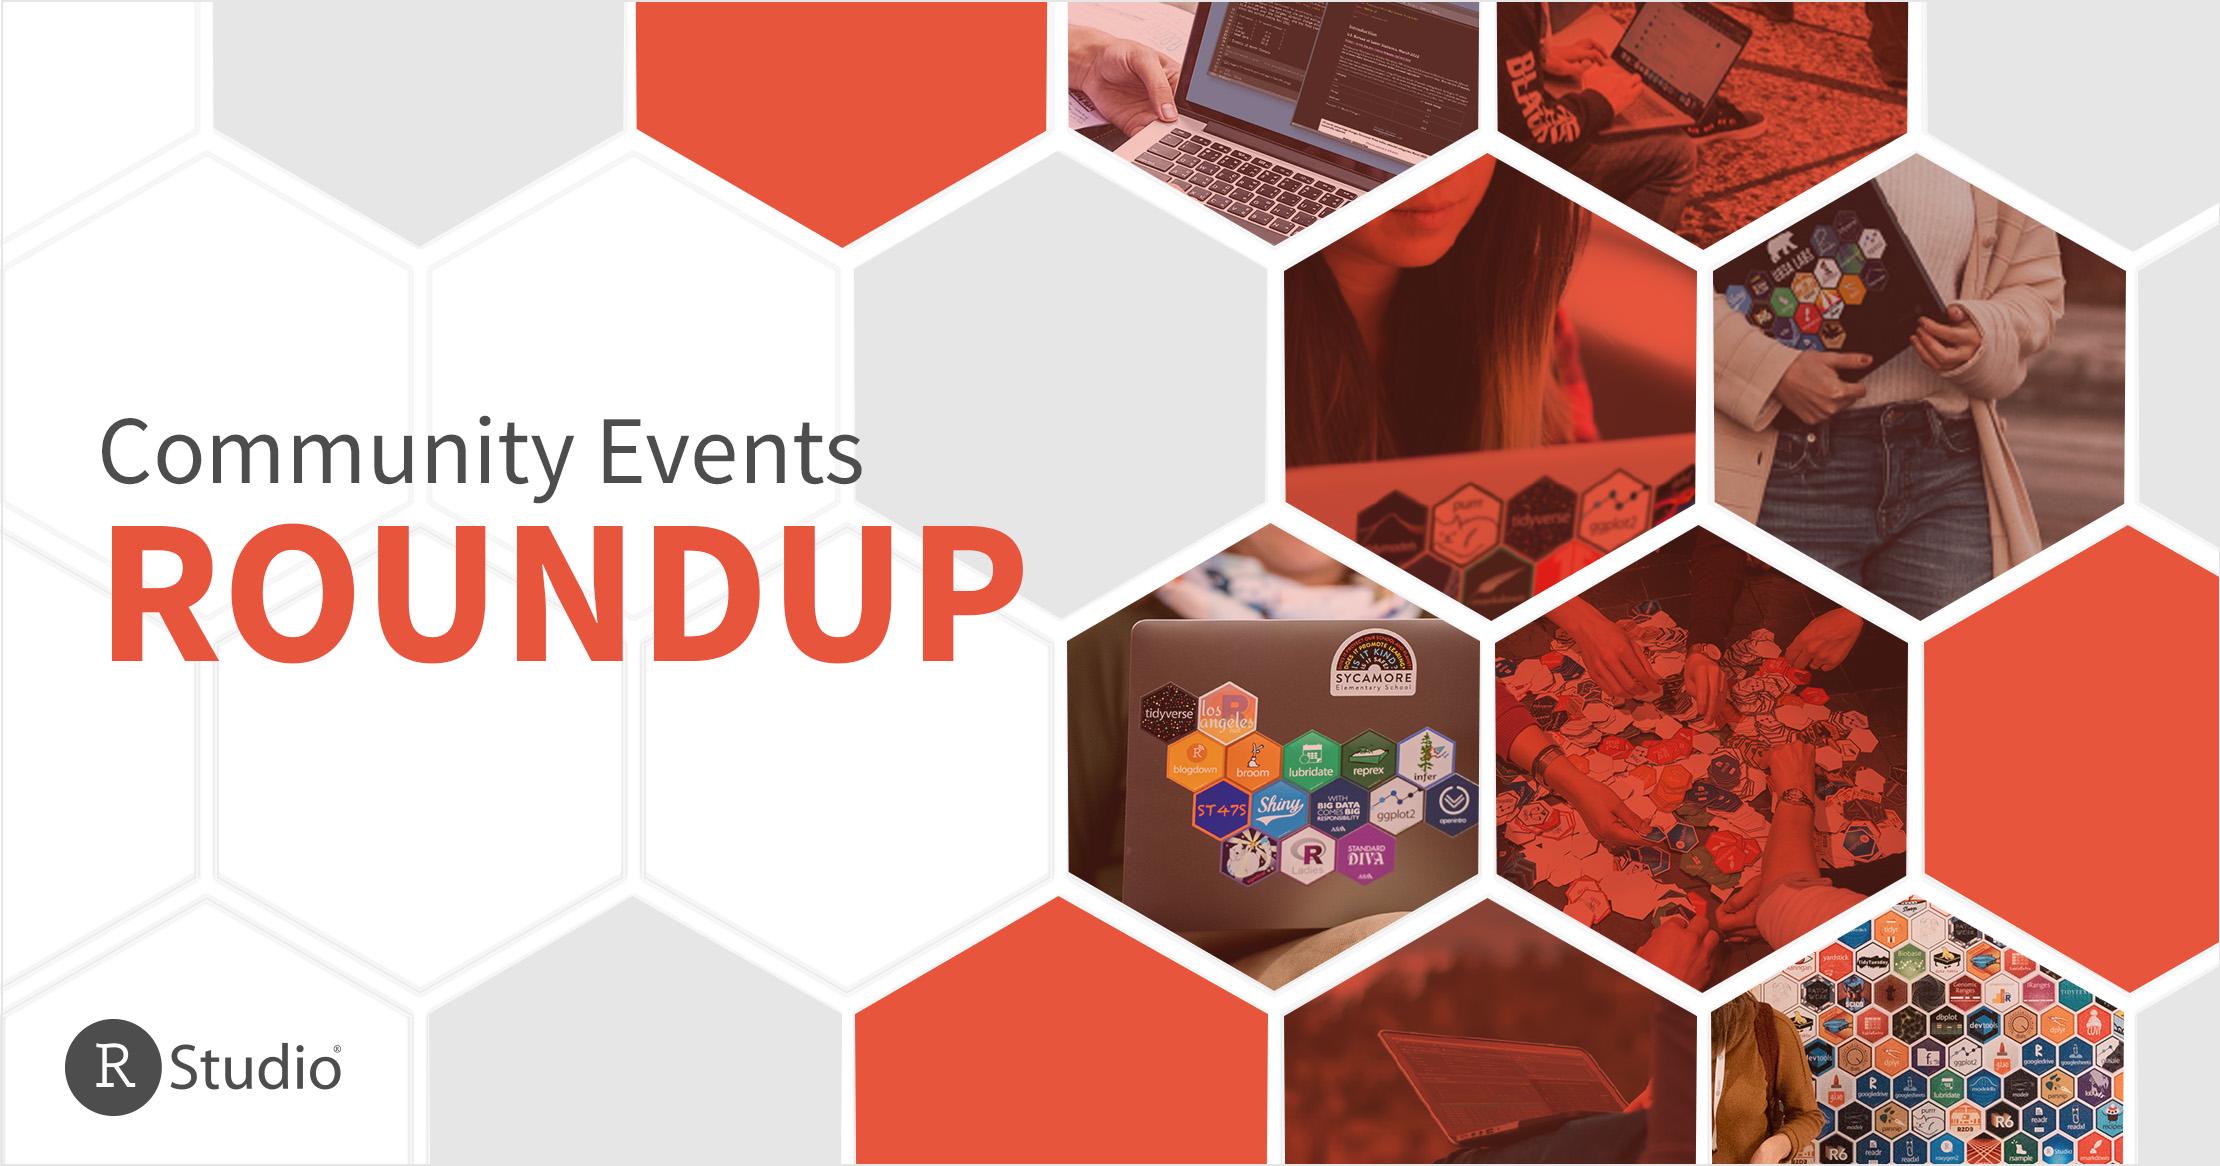 Thumbnail Text says Community Events Roundup. On the right-hand side, there are hexes embedded with images of laptops, hex stickers, and people. The RStudio logo is on the bottom left.